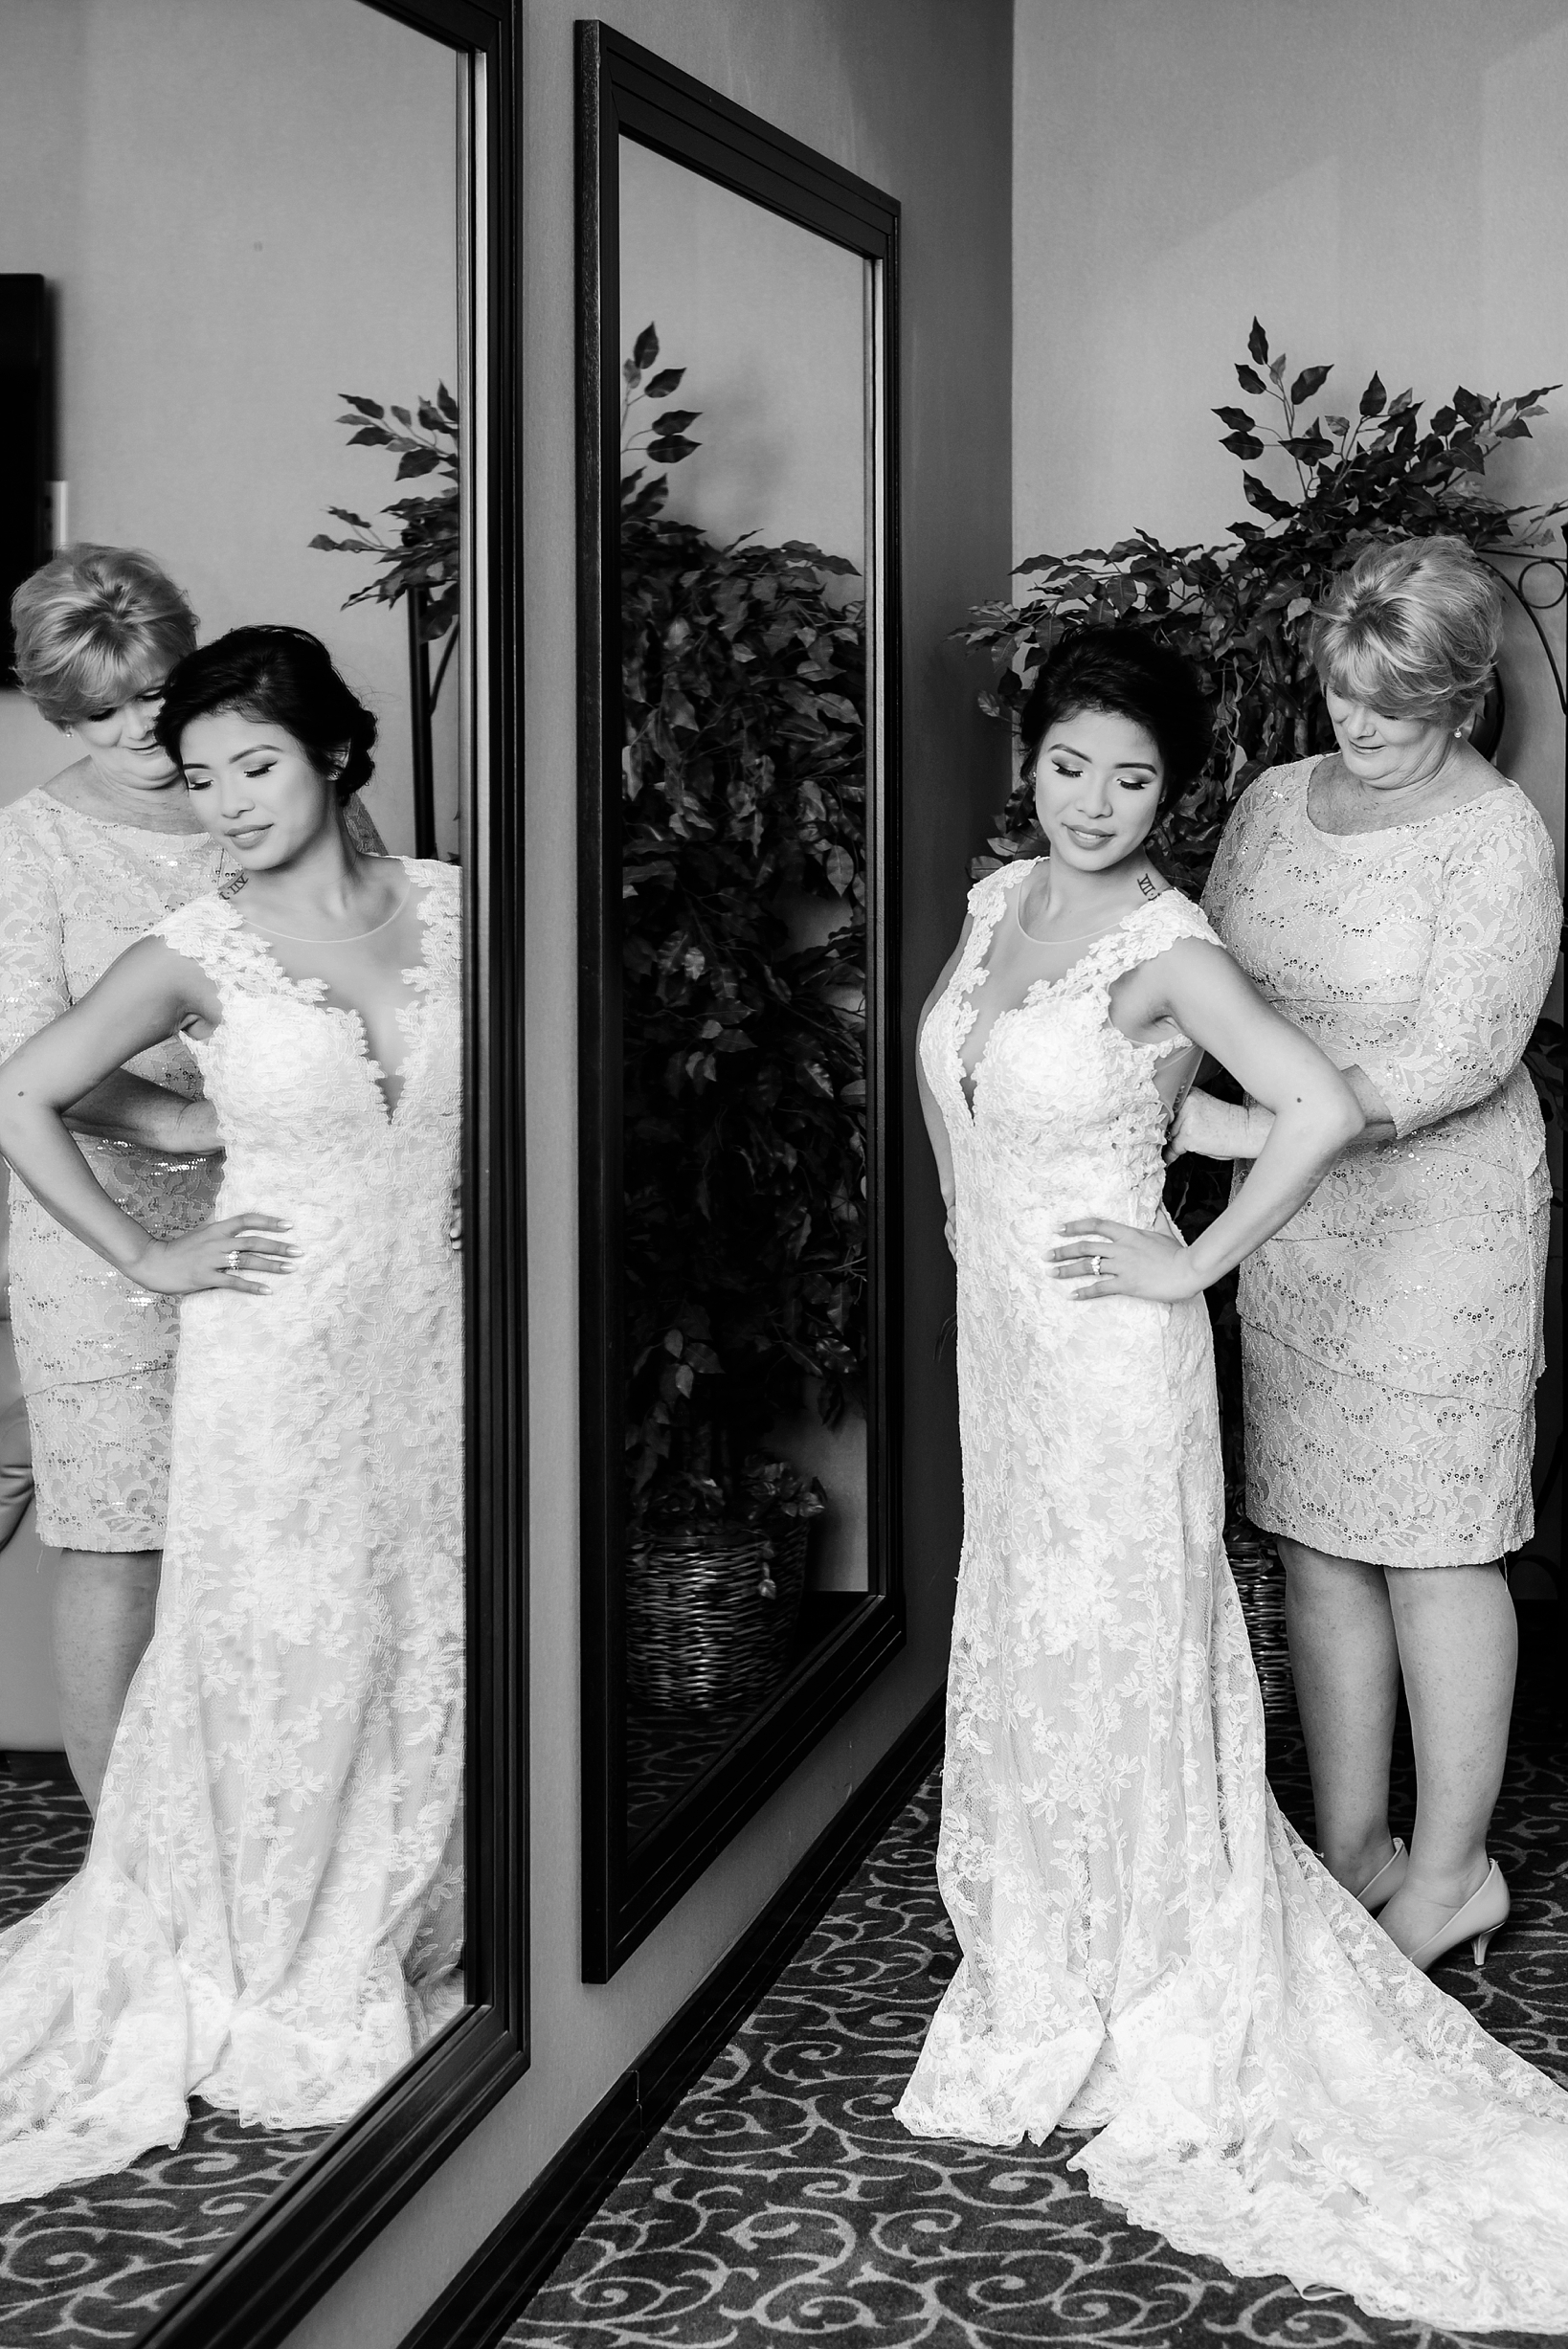 Black and white image of the bride getting into her dress in front of a mirror